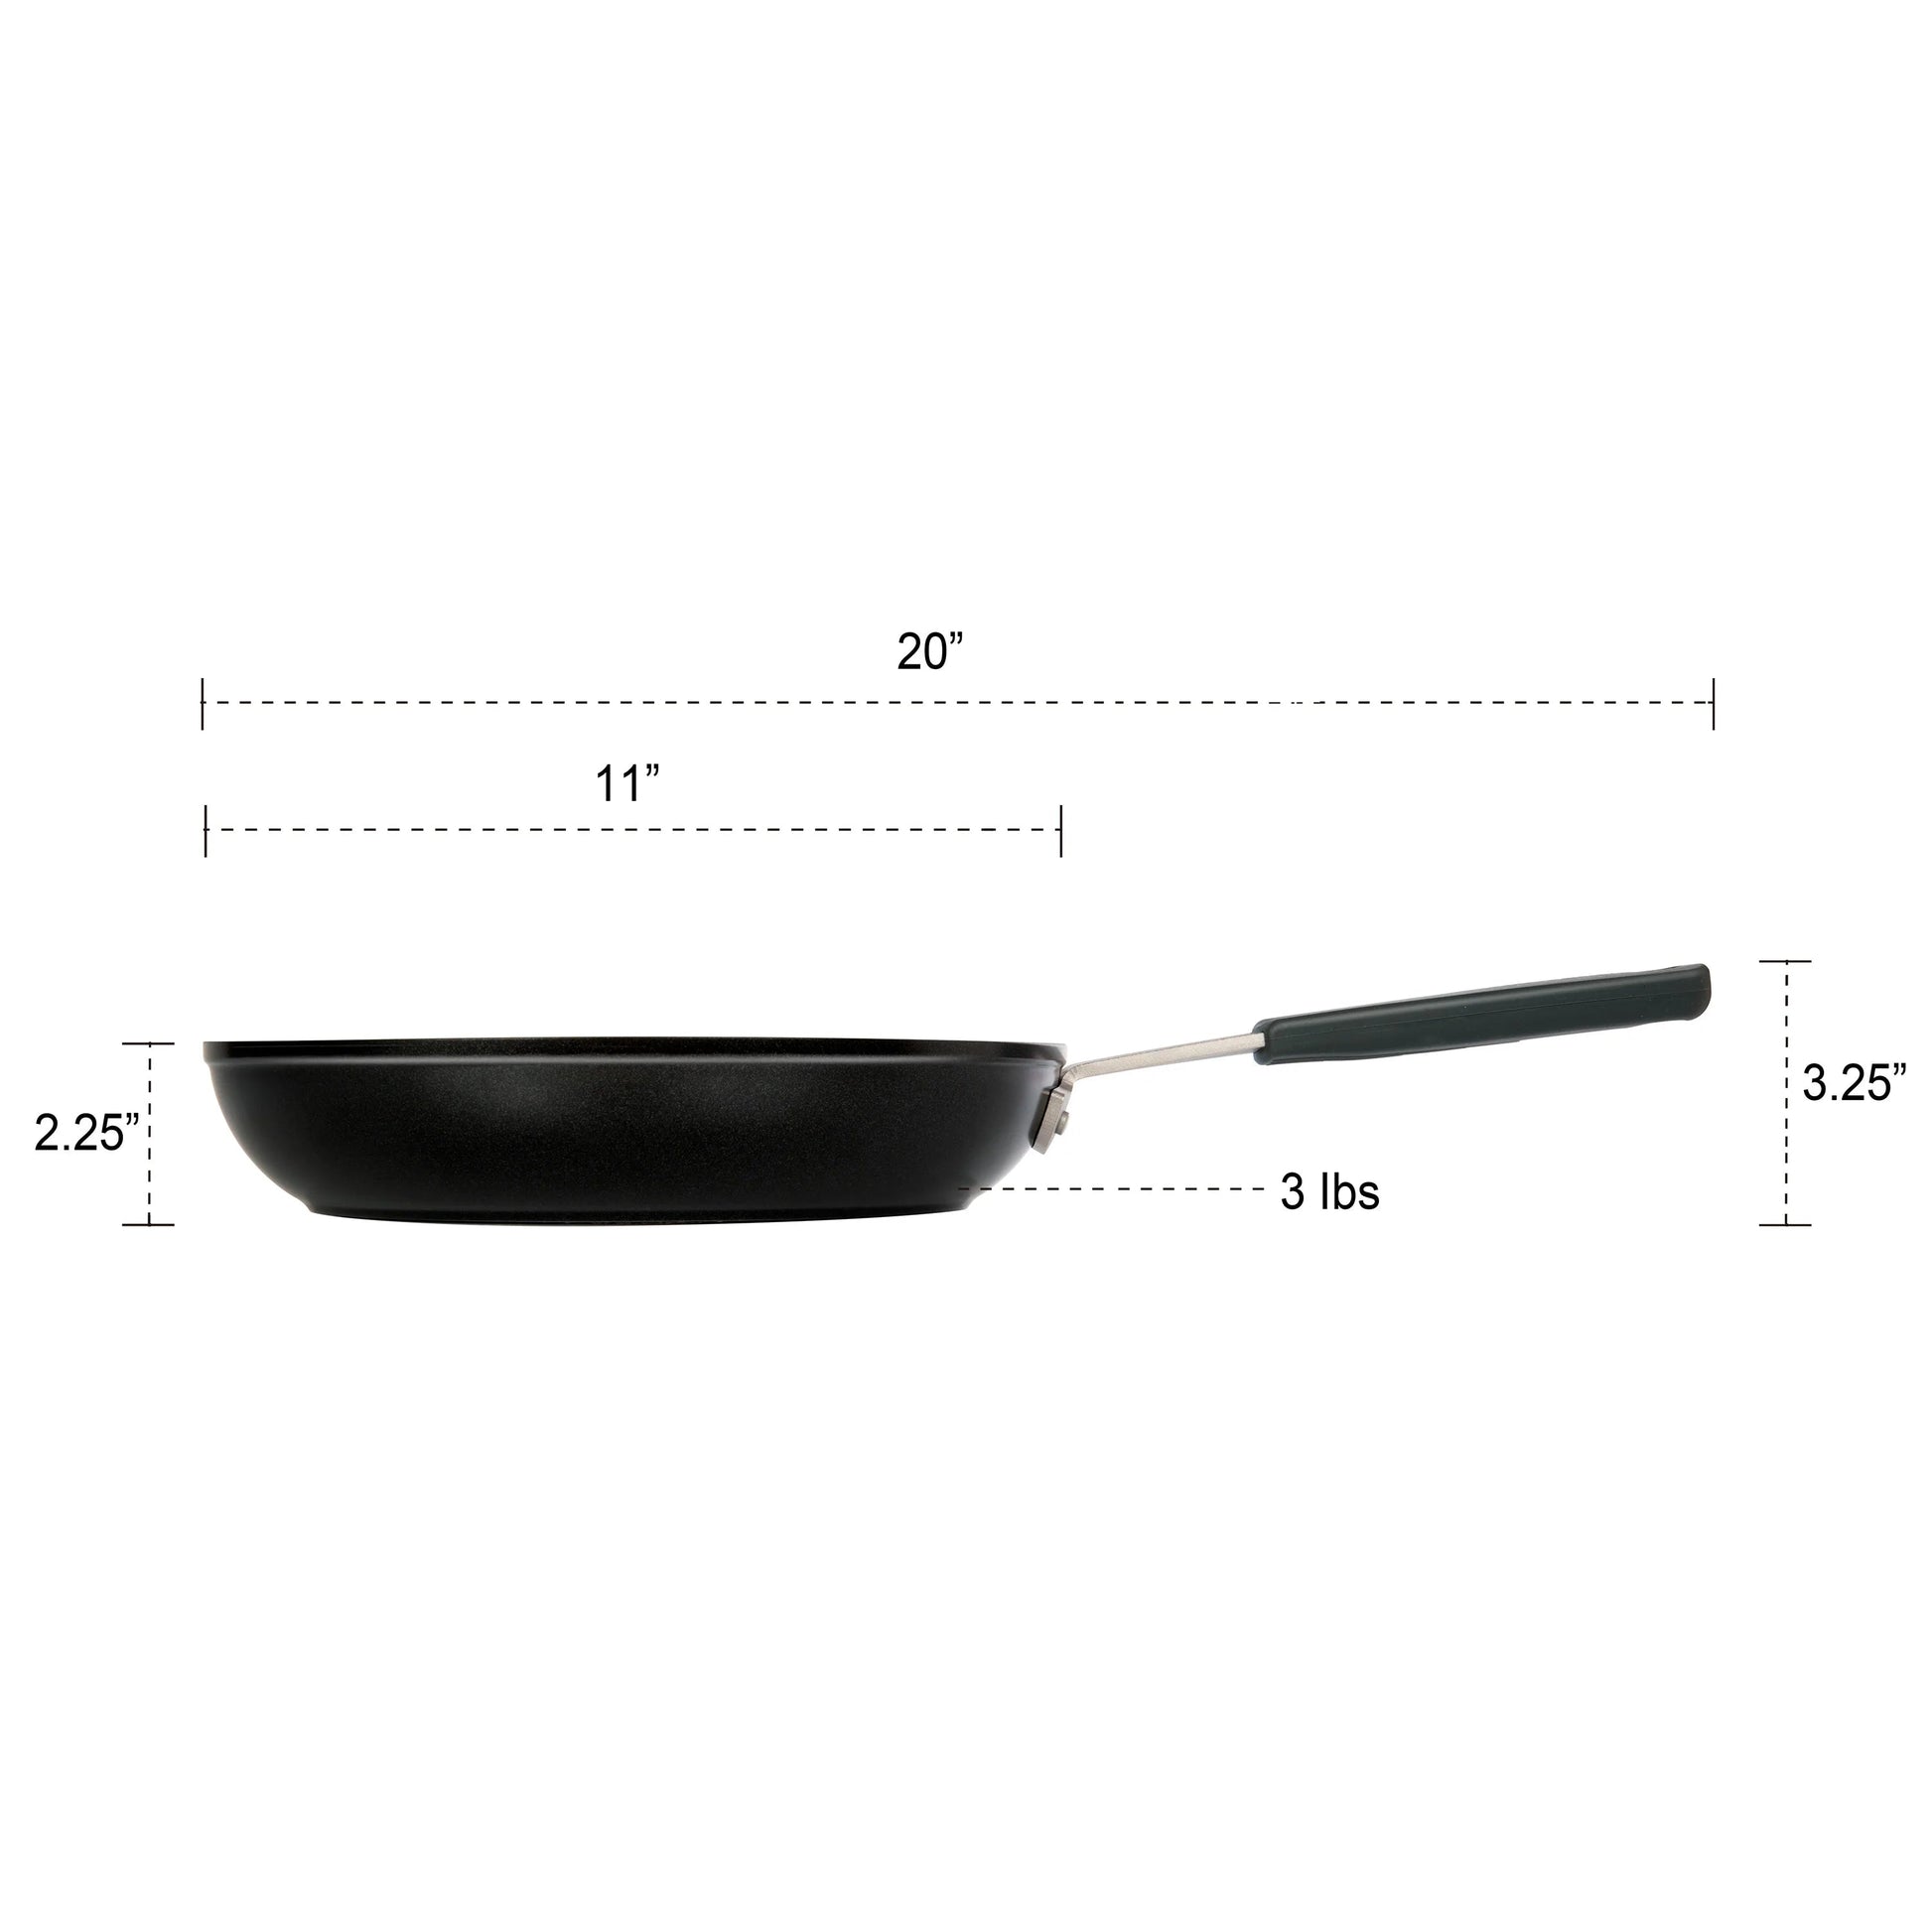 https://kitchenoasis.com/cdn/shop/files/MASTERPAN-Chefs-Series-11-4-Layer-Ceramic-Re-Enforced-Non-Stick-Cast-Aluminum-Frying-Pan-and-Skillet-With-Riveted-Stainless-Steel-Handle-and-Removable-Silicone-Handle-Cover-9.webp?v=1685839958&width=1946